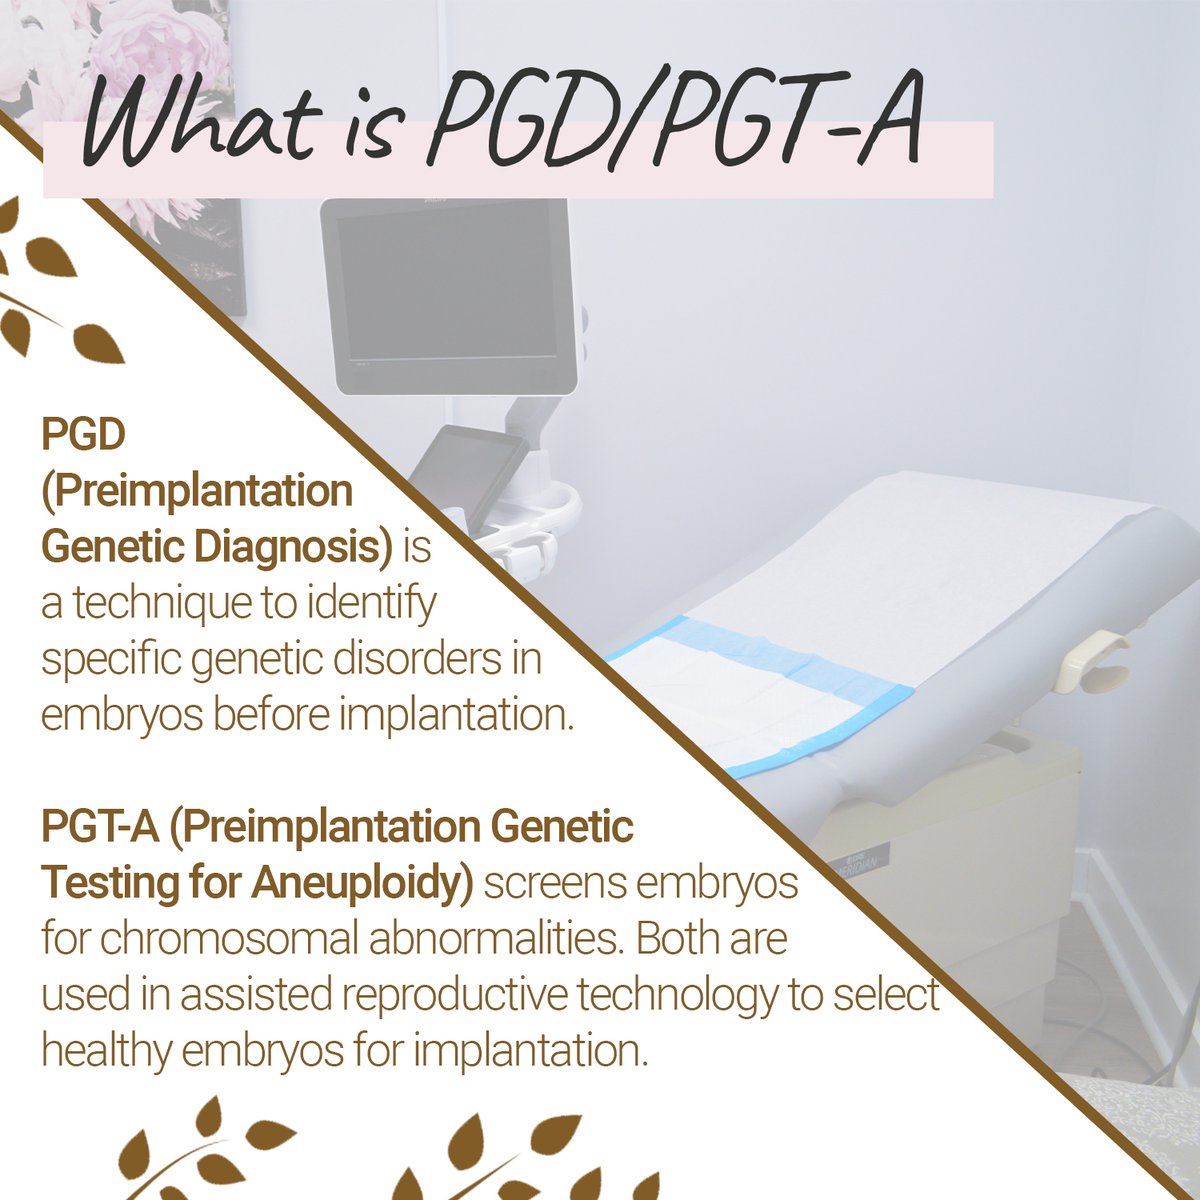 Preimplantation Genetic Diagnosis (PGD) and Preimplantation Genetic Testing for Aneuploidies (PGT-A) are revolutionizing the realm of genetic testing in IVF, offering new hope and possibilities.

#FertilityStories #ChinBaby #DrChin #Fertility #FertilityAndWellness #Ohio